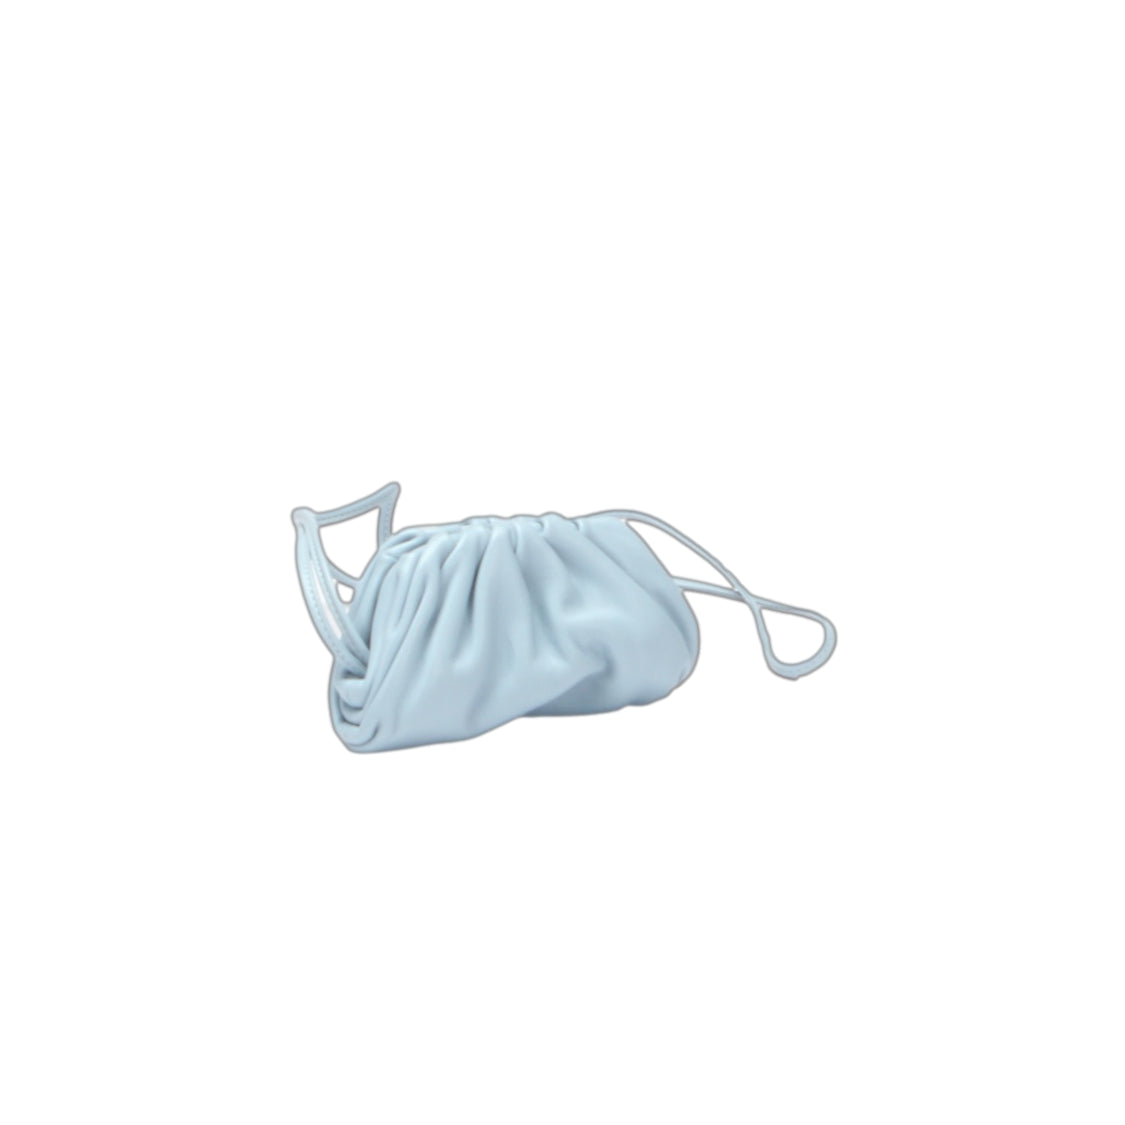 The Mini Pouch Leather Bag